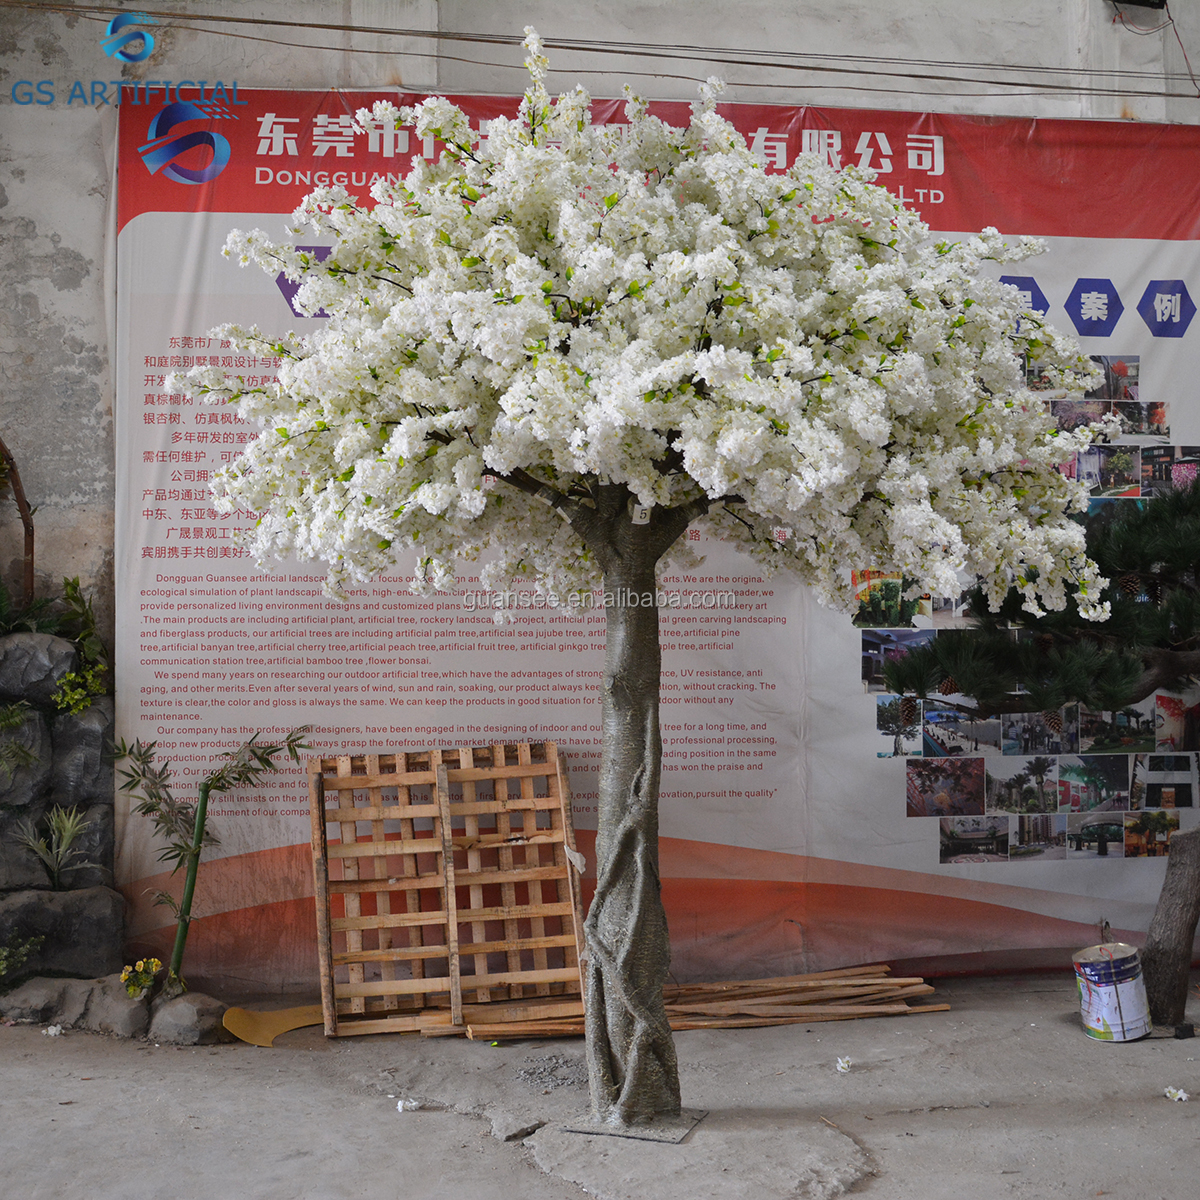 Artificial White Cherry Blossom Flower Tree for decoration